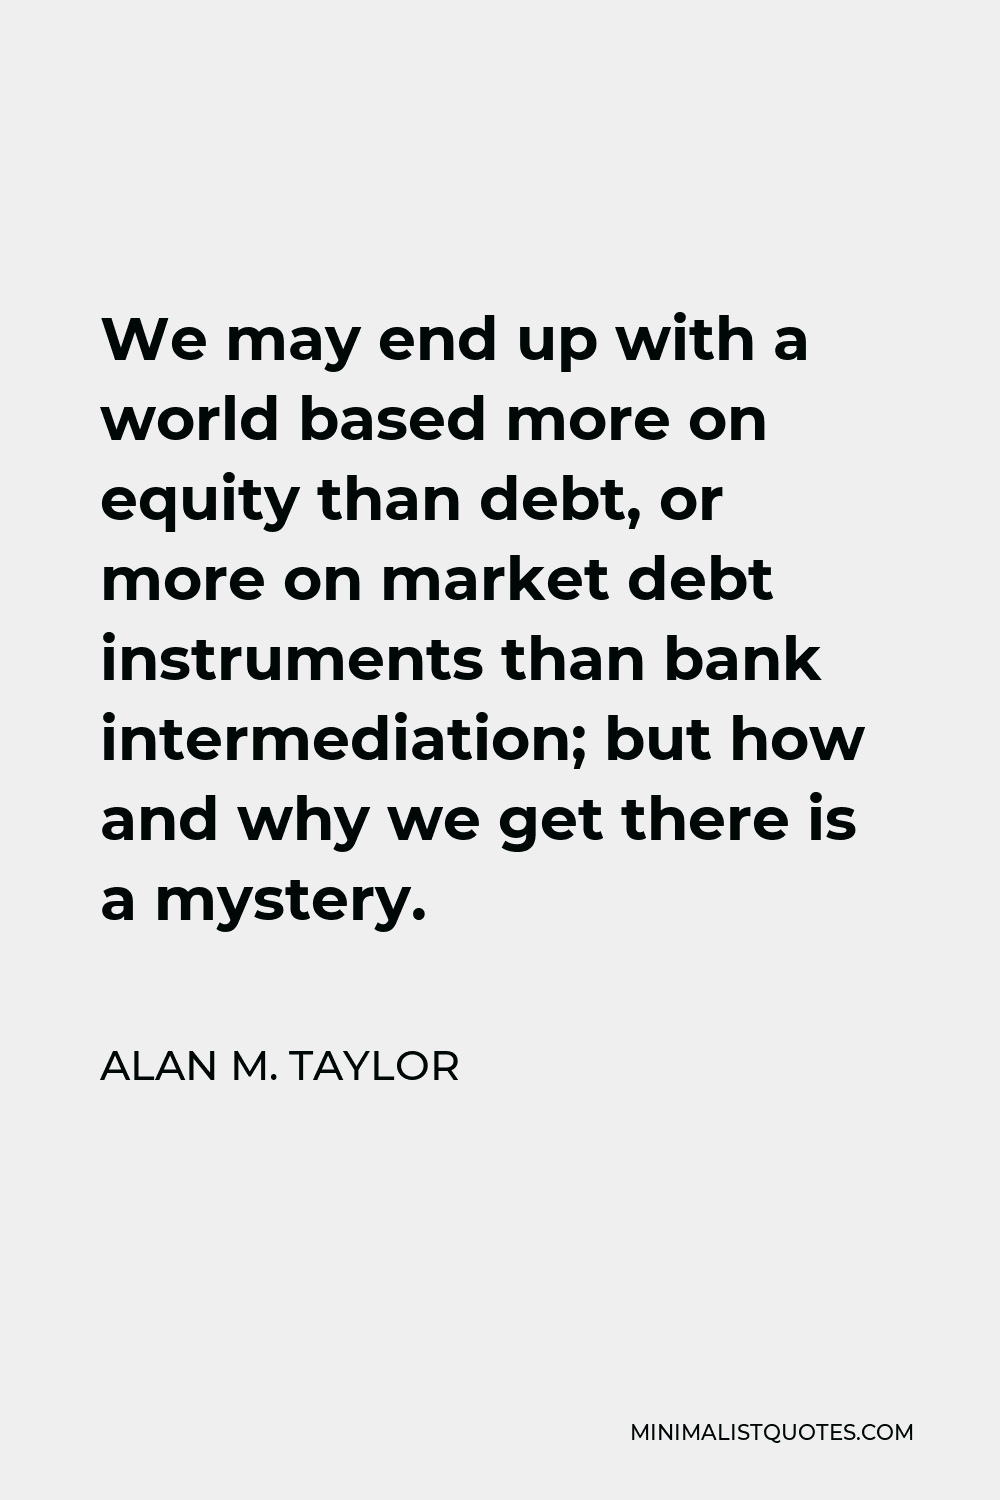 Alan M. Taylor Quote - We may end up with a world based more on equity than debt, or more on market debt instruments than bank intermediation; but how and why we get there is a mystery.